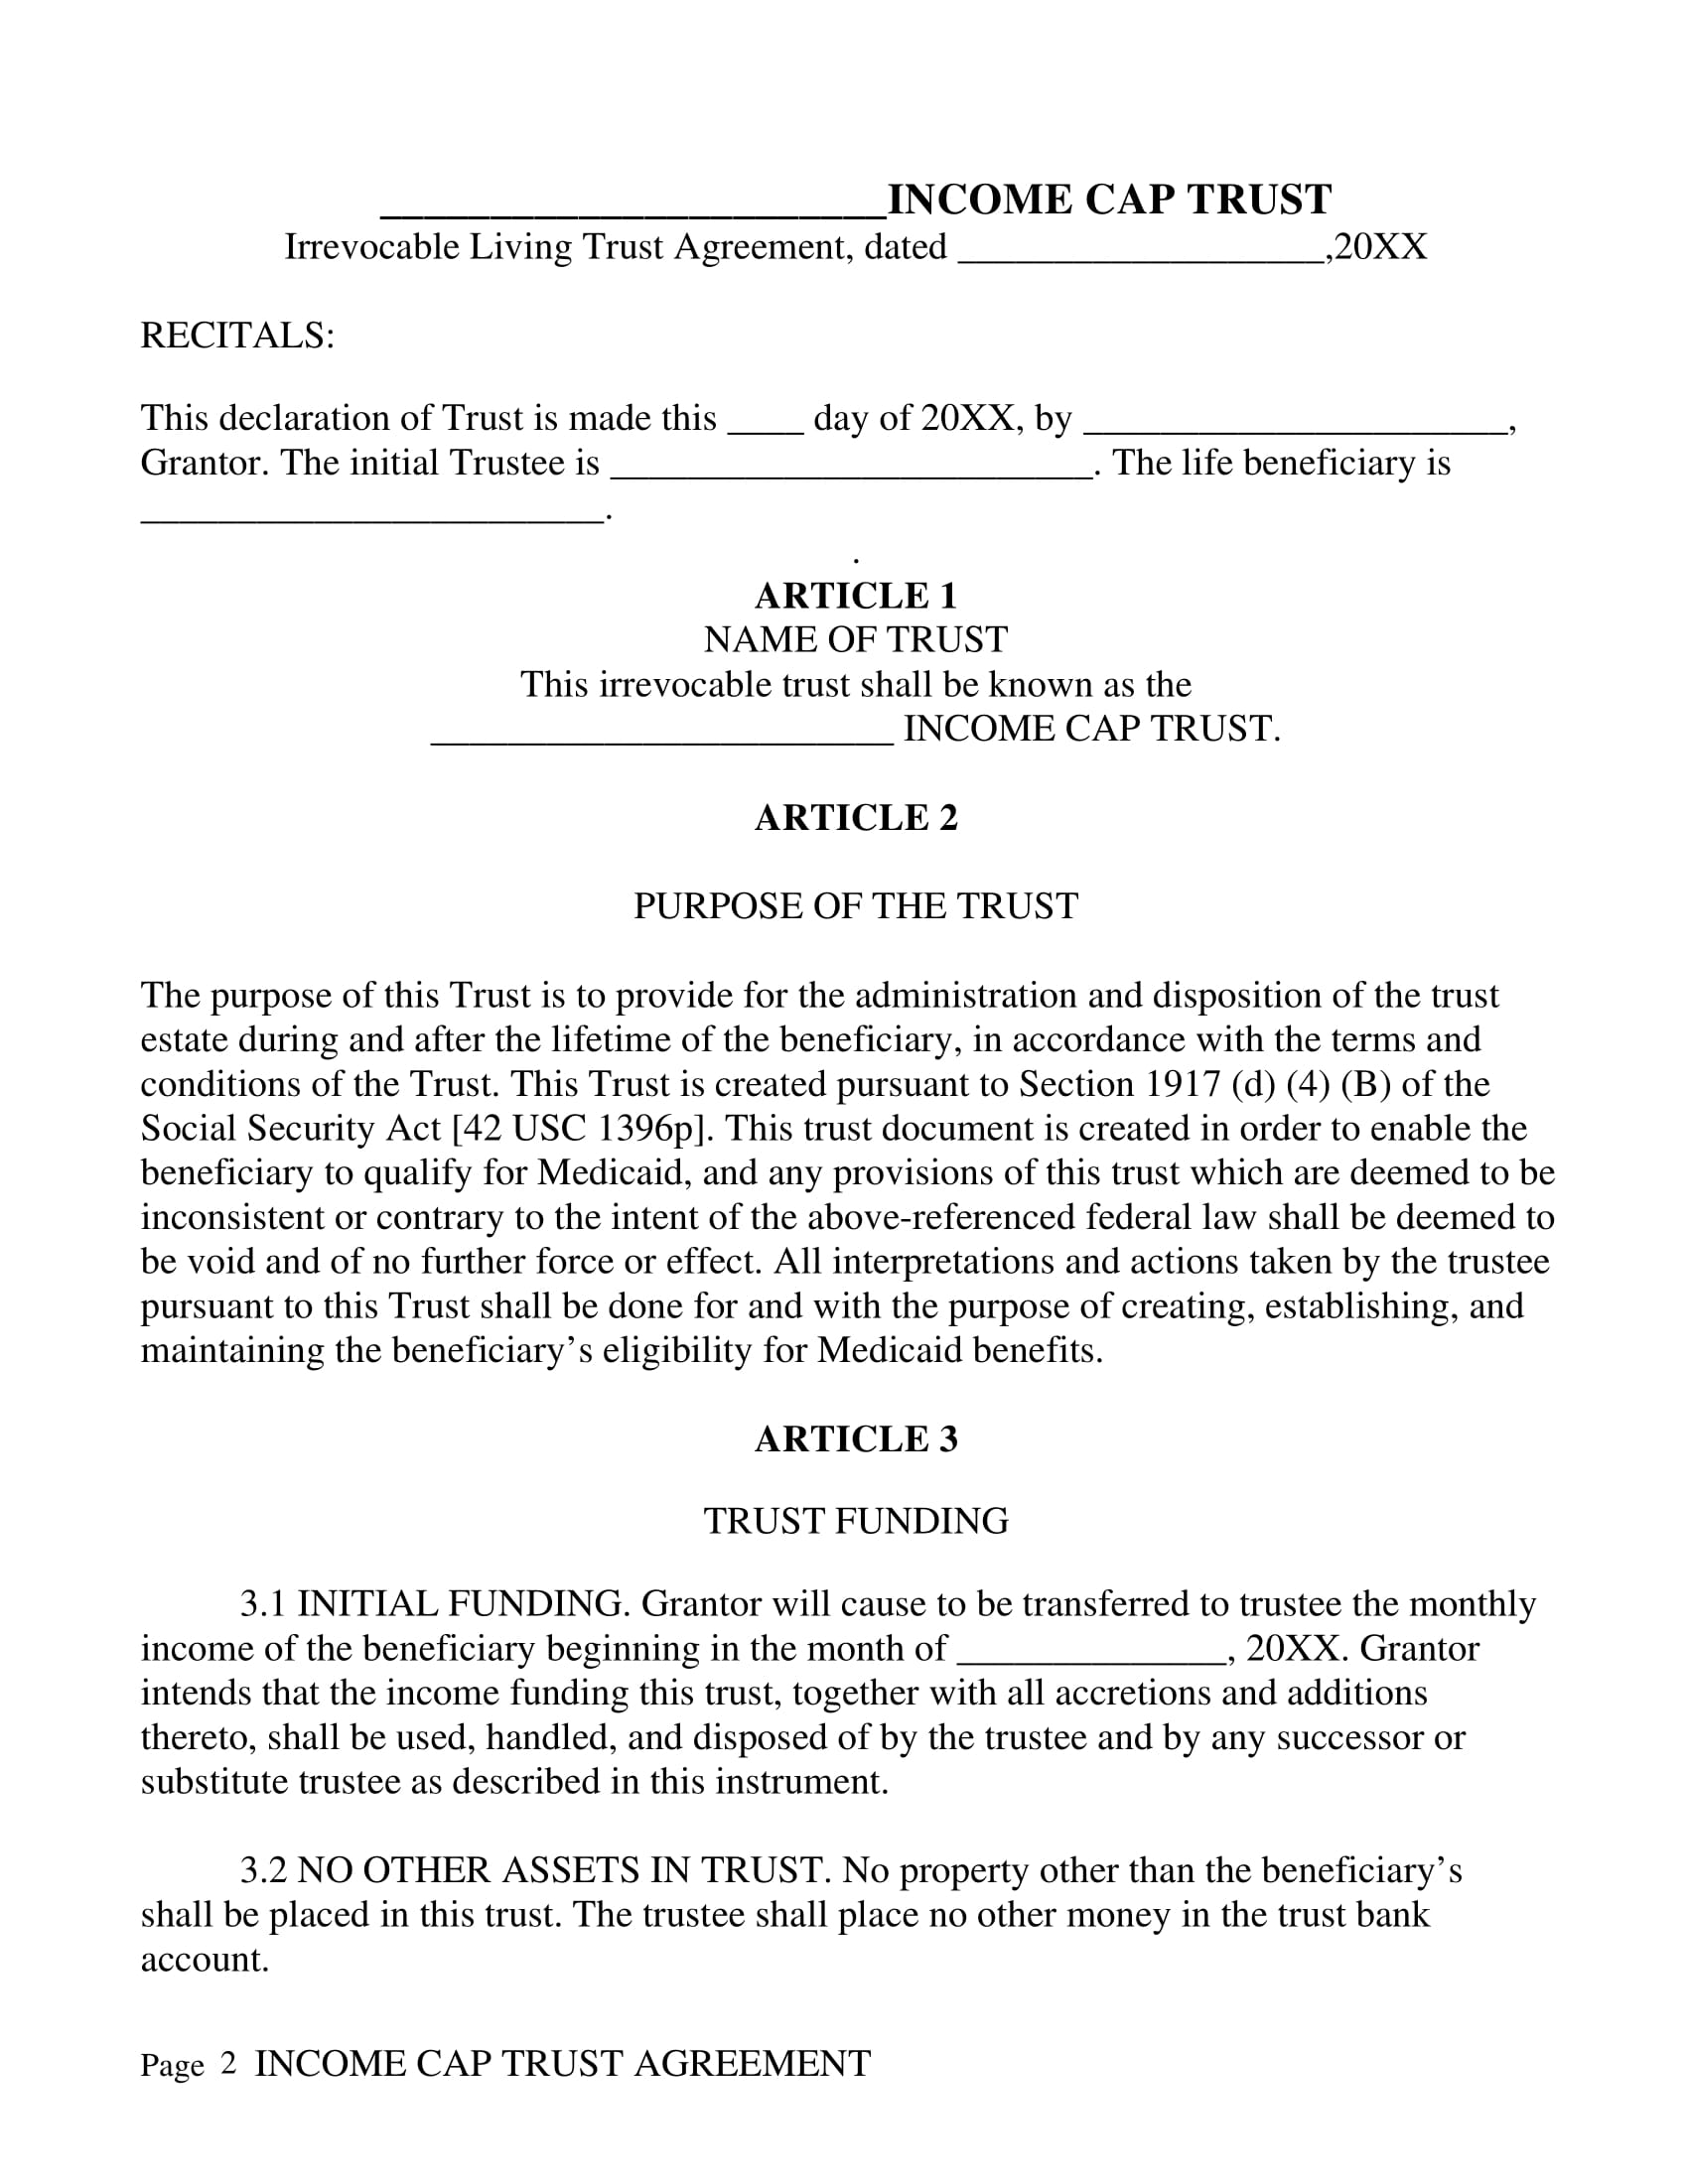 irrevocable living trust agreement contract form 2